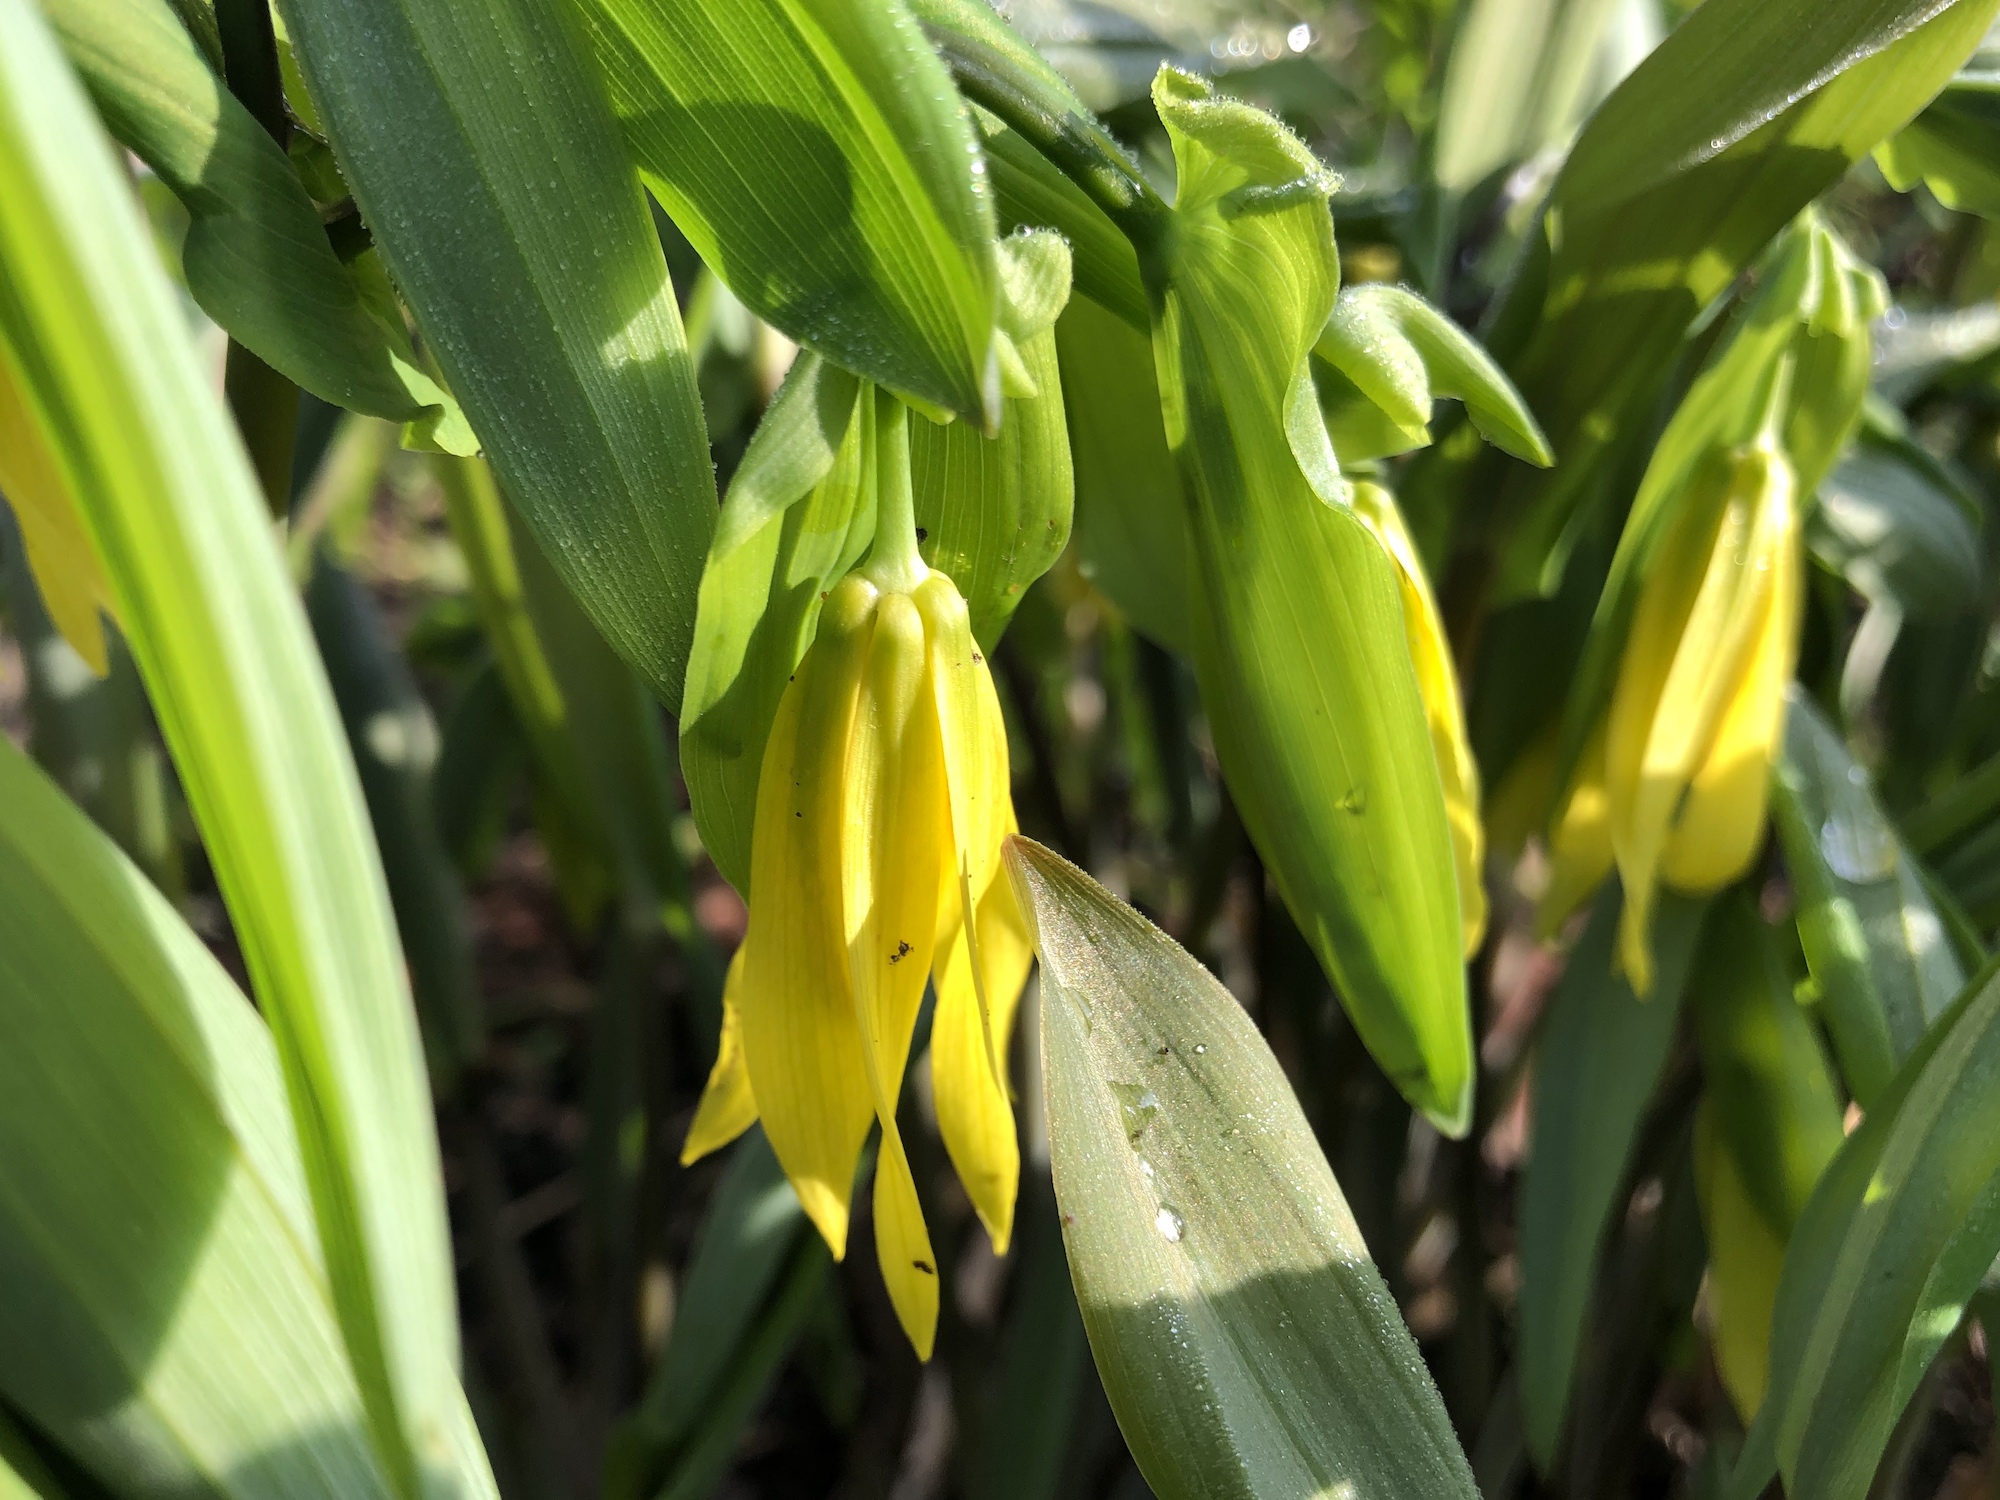 Bellwort in Madison, Wisconsin on April 28, 2020.